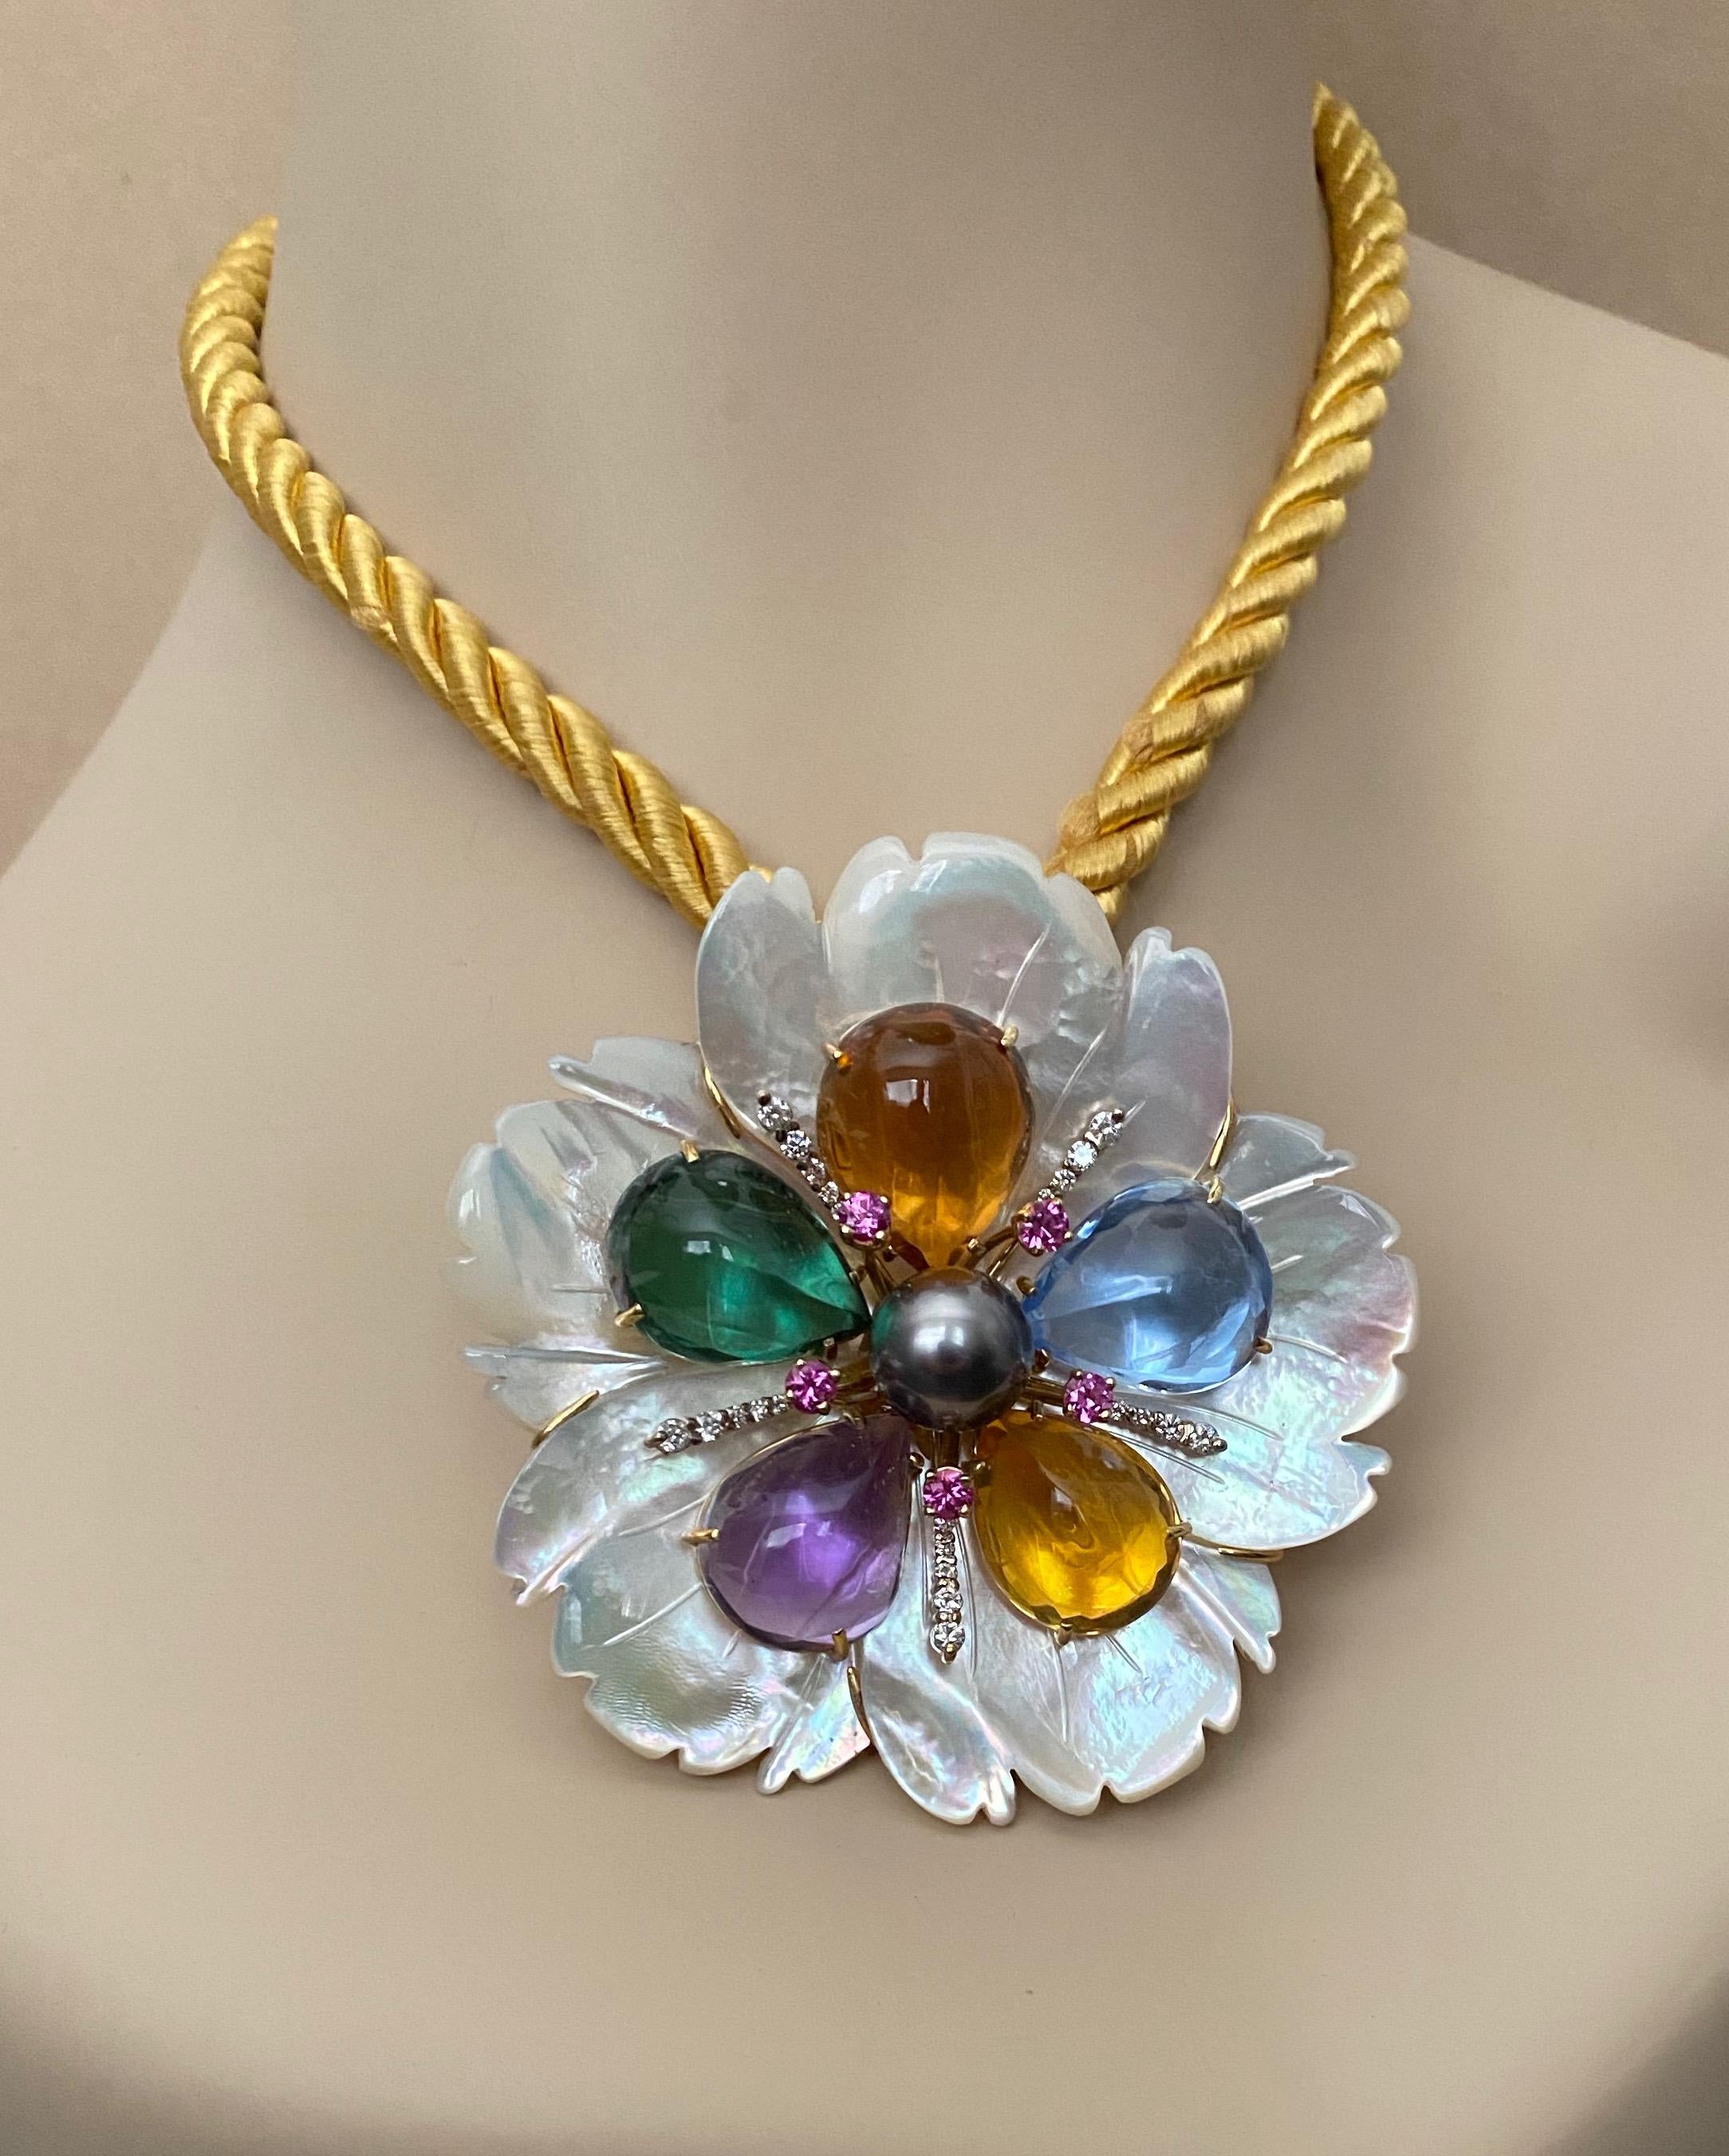 A carved mother-of-pearl flower forms the foundation for this elegant one-of-a-kind combination pendant and brooch.  Pear shaped cabochons of amethyst, citrine, blue topaz and green amethyst along with pink sapphires, diamonds and a generously sized